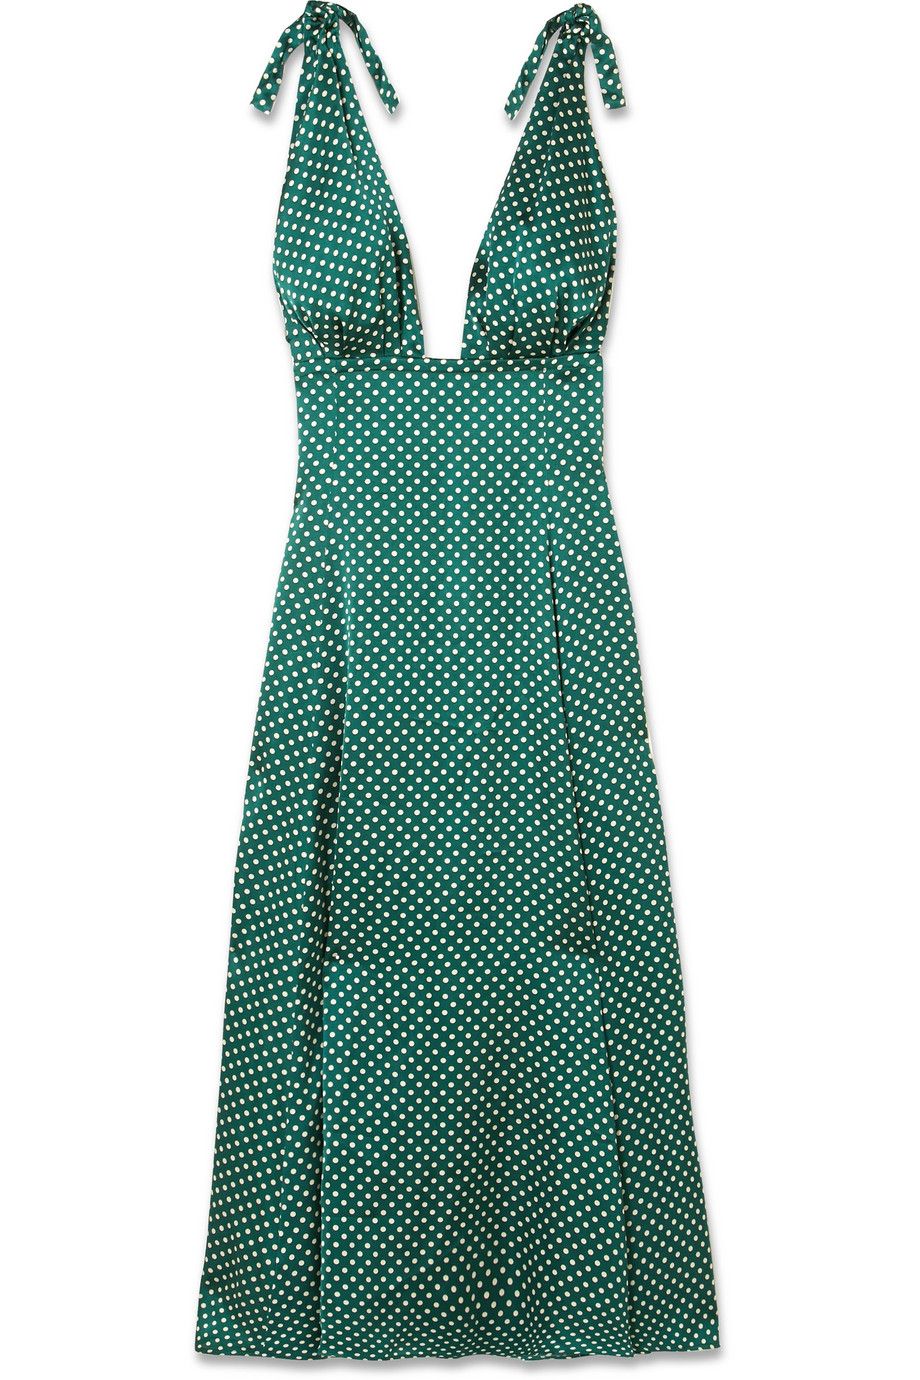 Clothing, Day dress, Dress, Green, Aqua, Turquoise, Pattern, Cocktail dress, Teal, One-piece garment, 